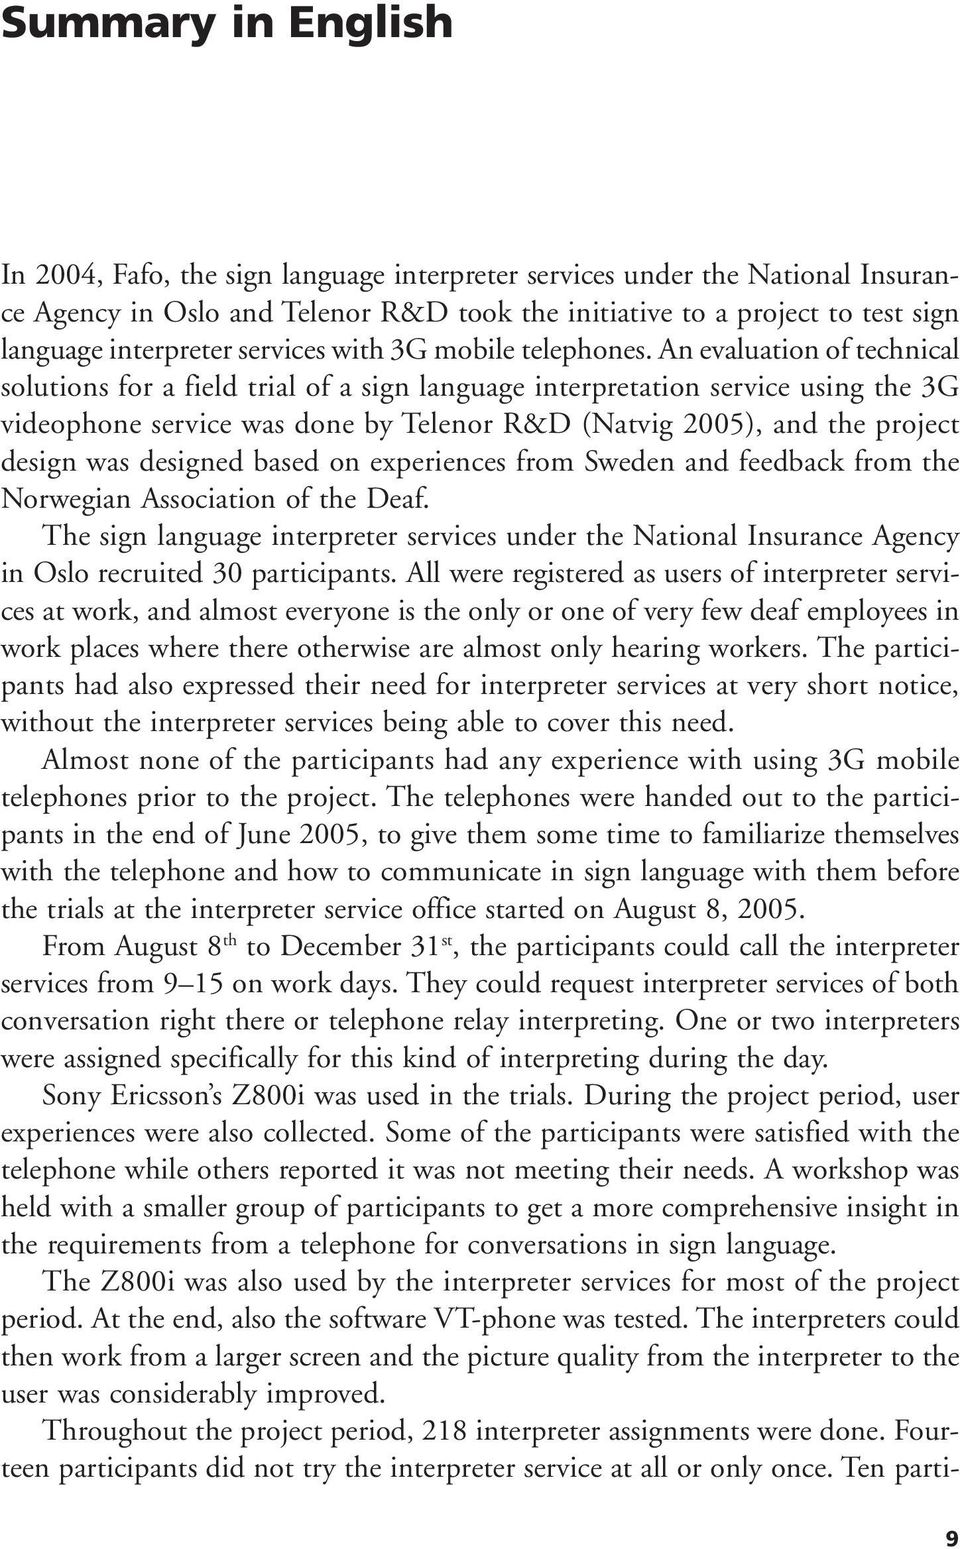 An evaluation of technical solutions for a field trial of a sign language interpretation service using the 3G videophone service was done by Telenor R&D (Natvig 2005), and the project design was